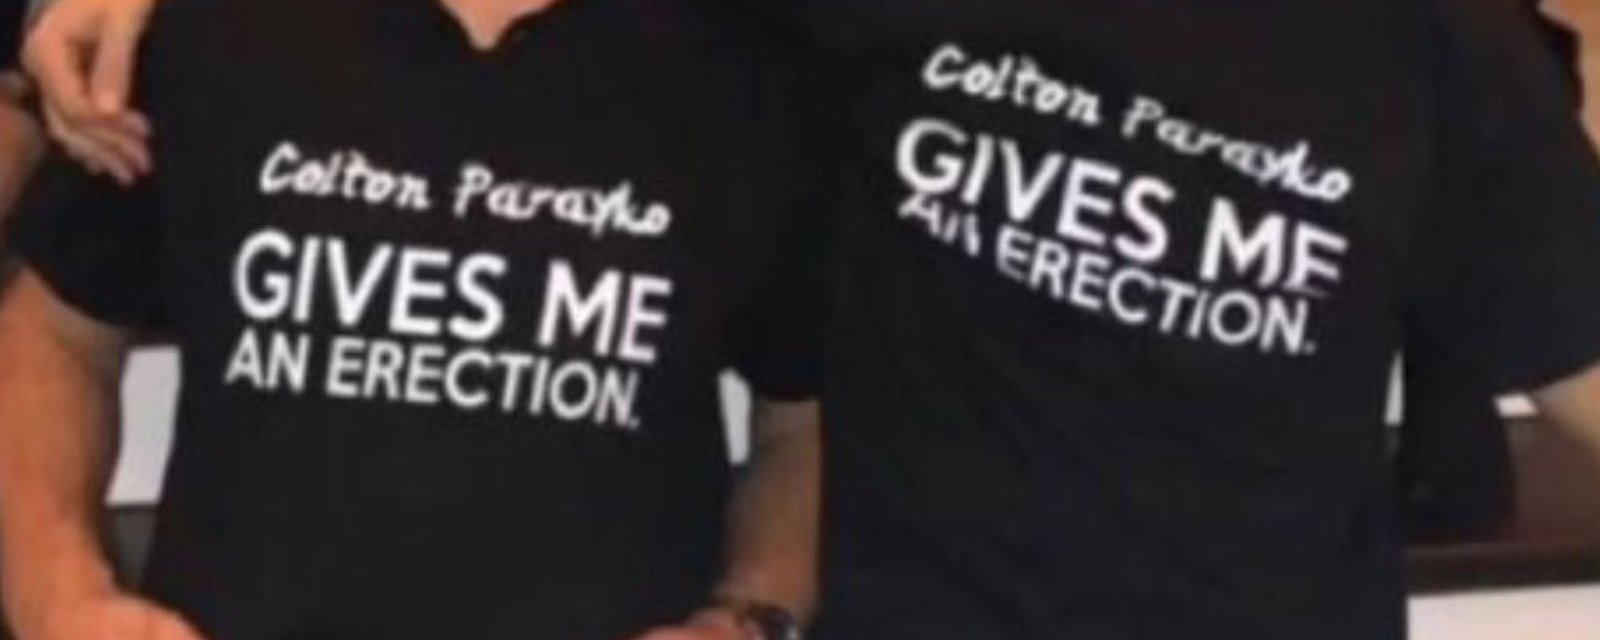 Three Blues players wear confusing “Colton Parayko Gives Me An Erection” shirts